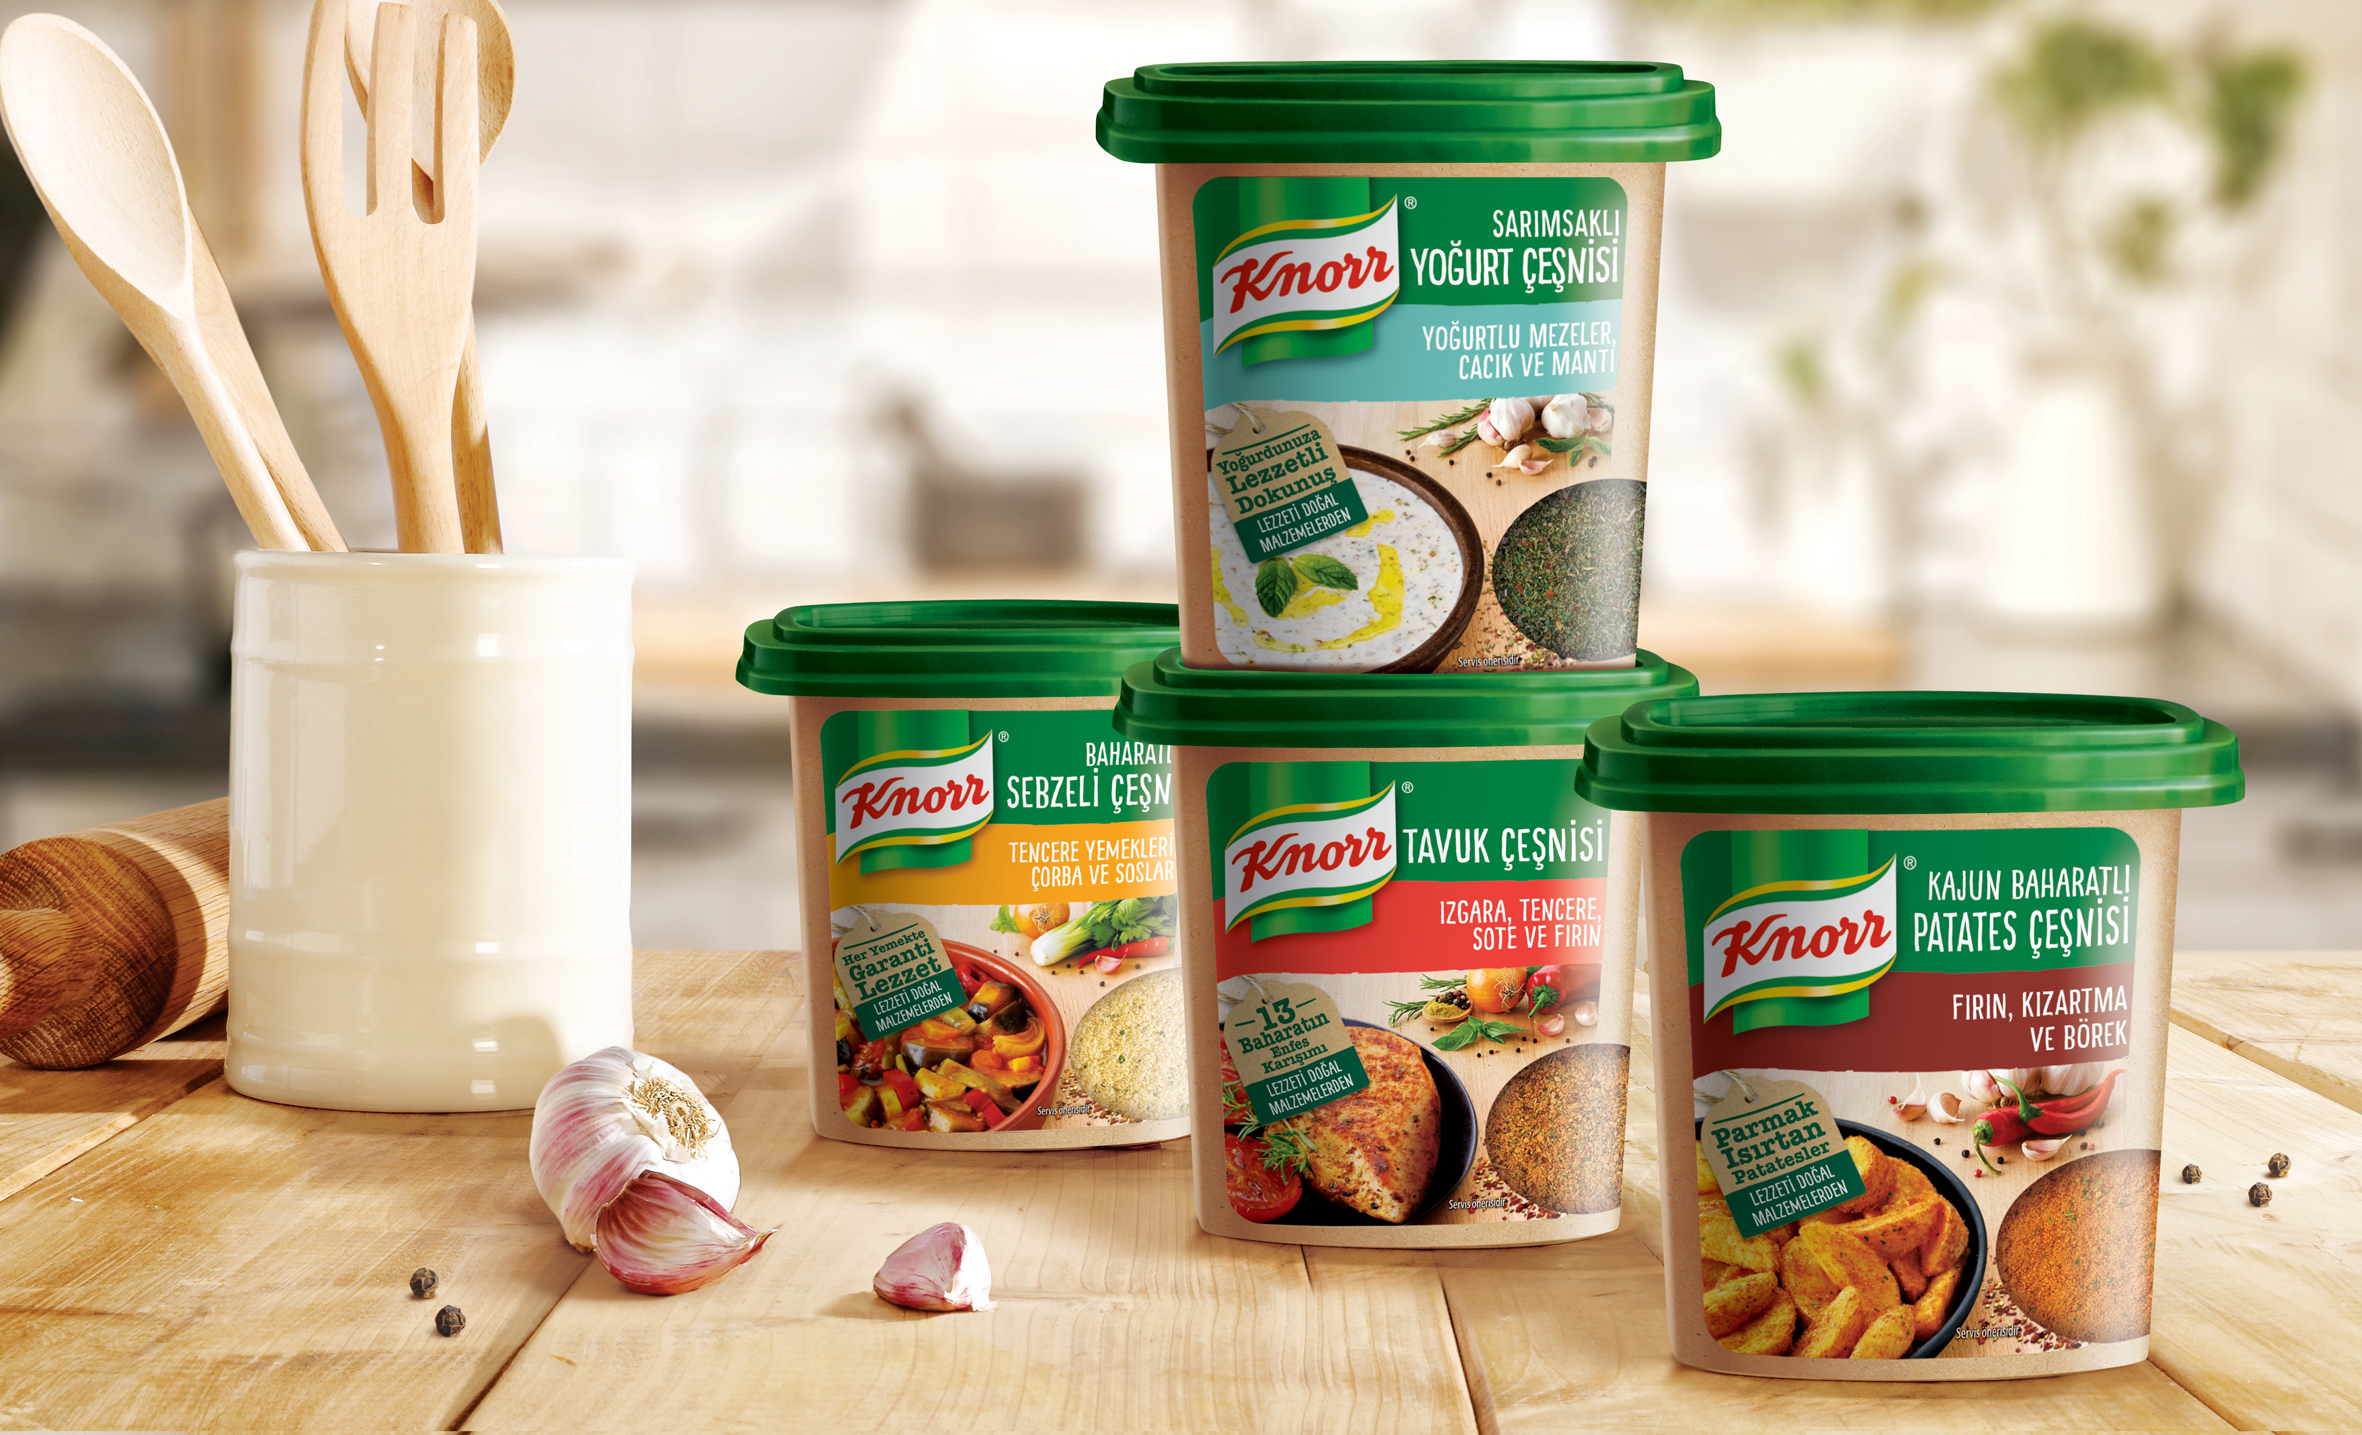 New Packaging Design for Knorr Seasoning Series in the Turkish Market